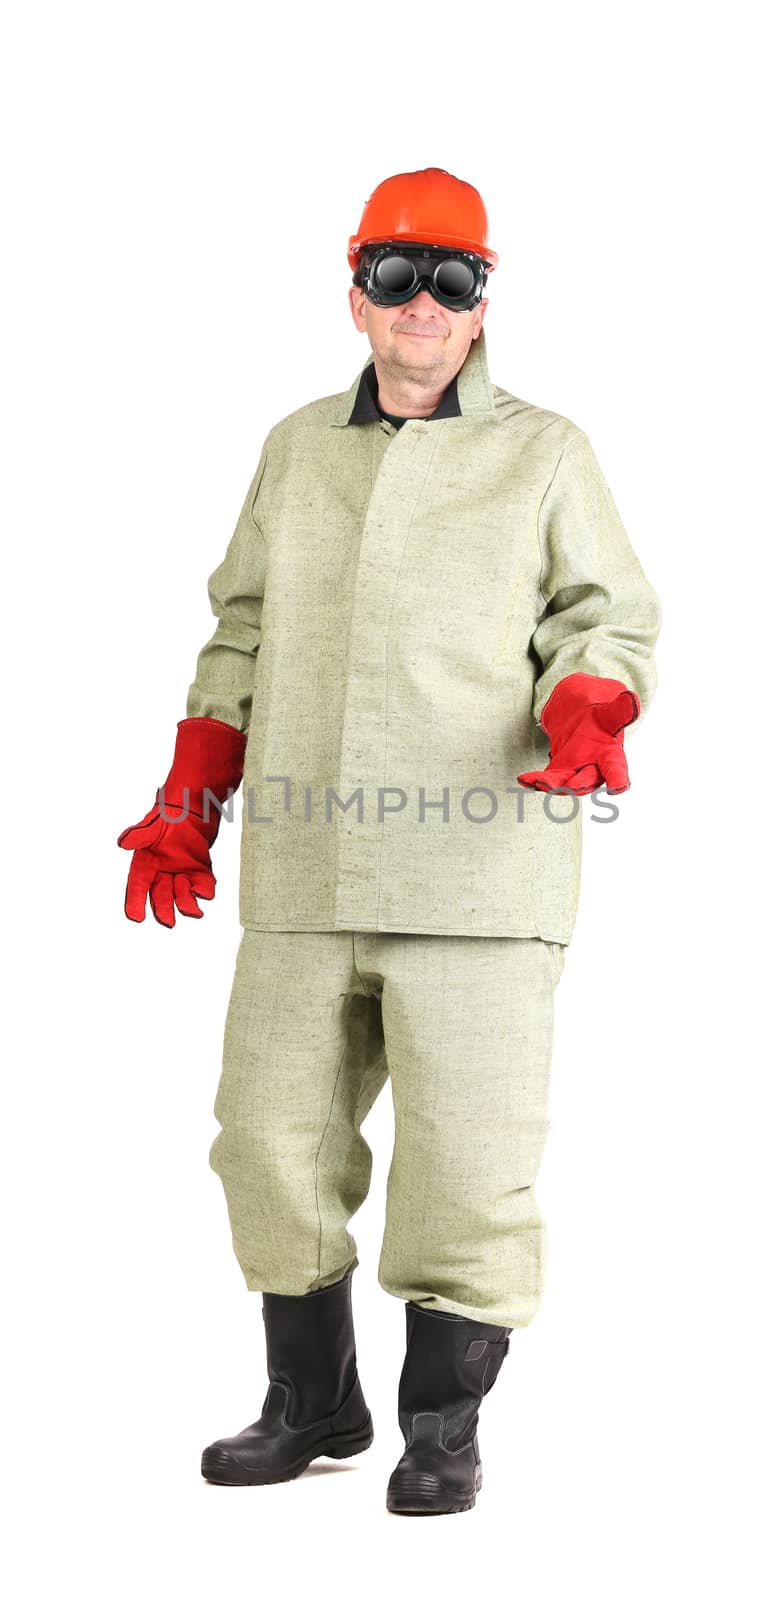 Welder in red helmet. Isolated on a white background.